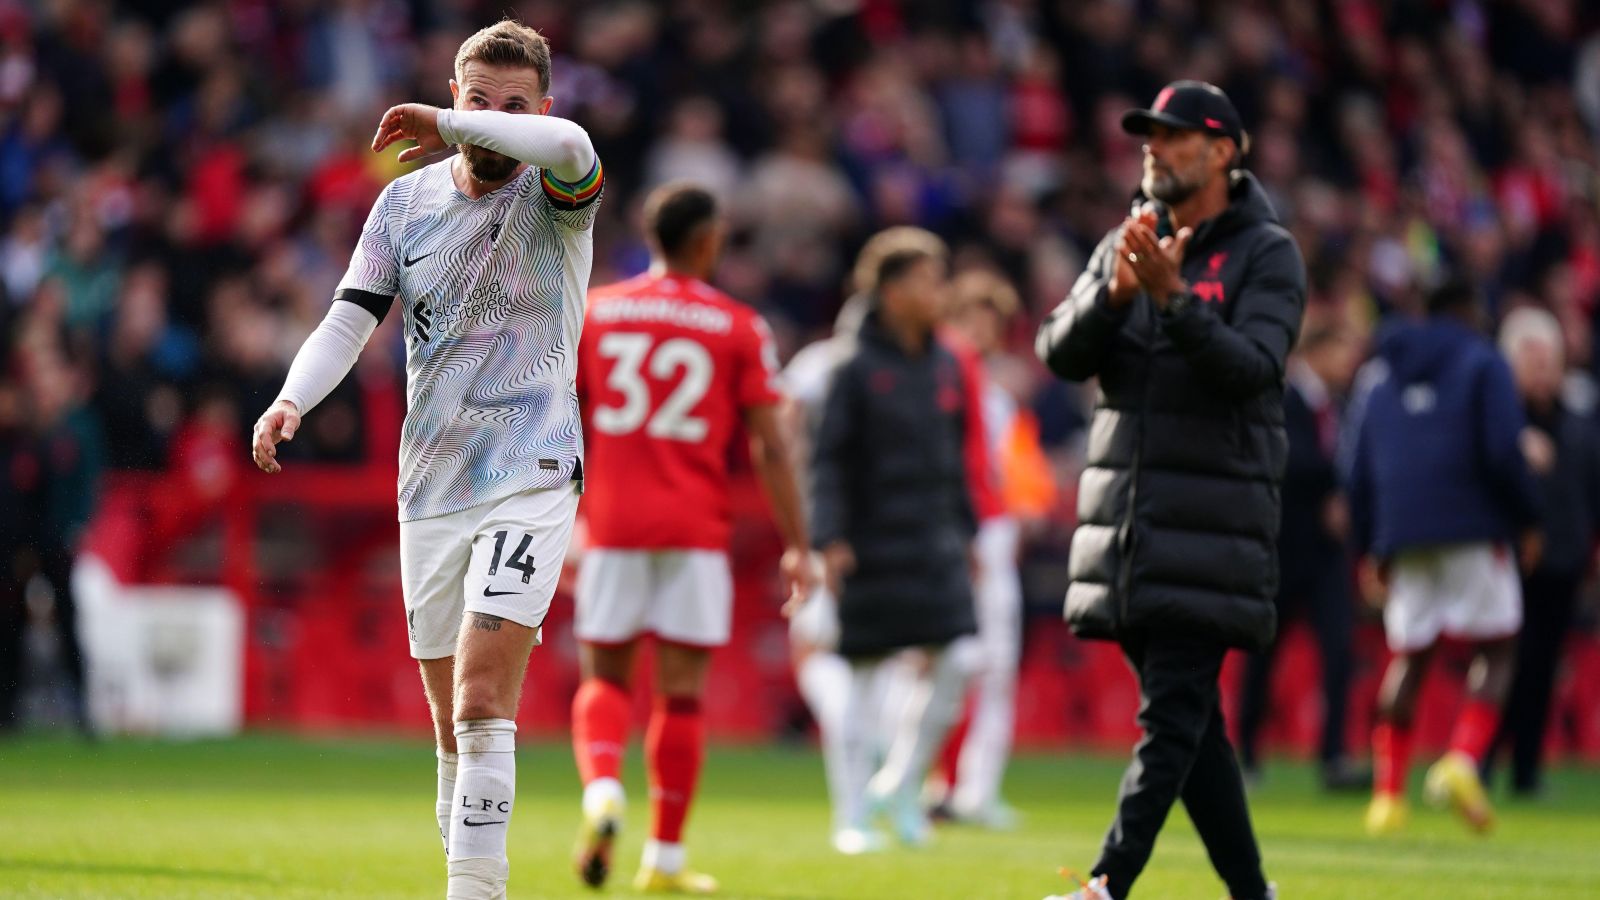 Liverpool captain Jordan Henderson wipes his face with his arm